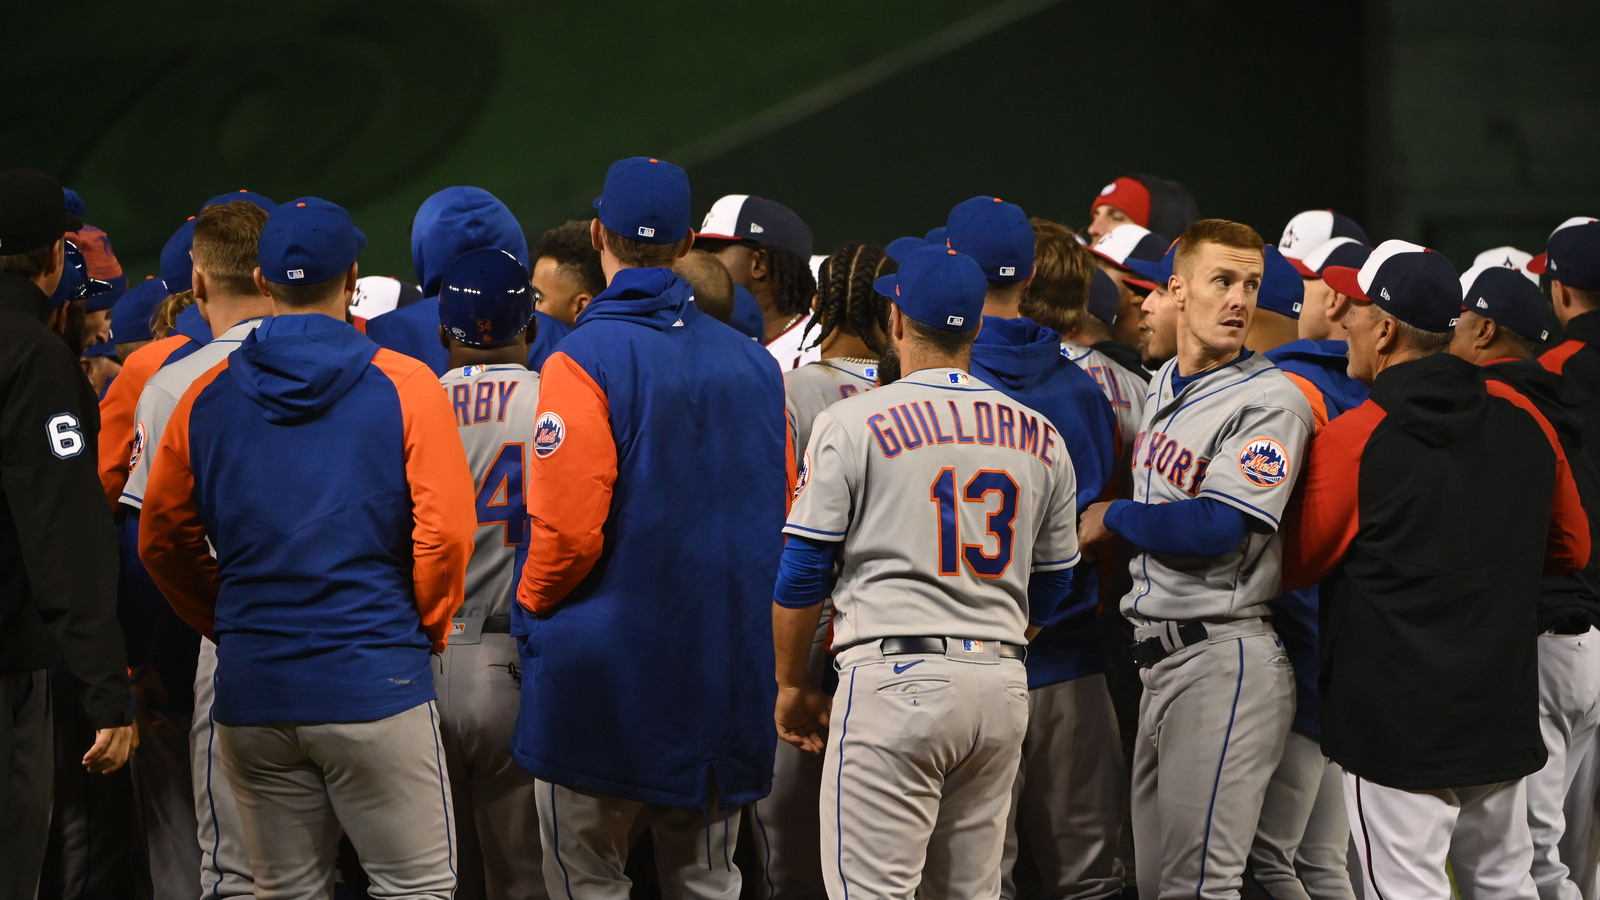 Steve Cishek ejected for starting Mets-Nationals bench-clearing incident